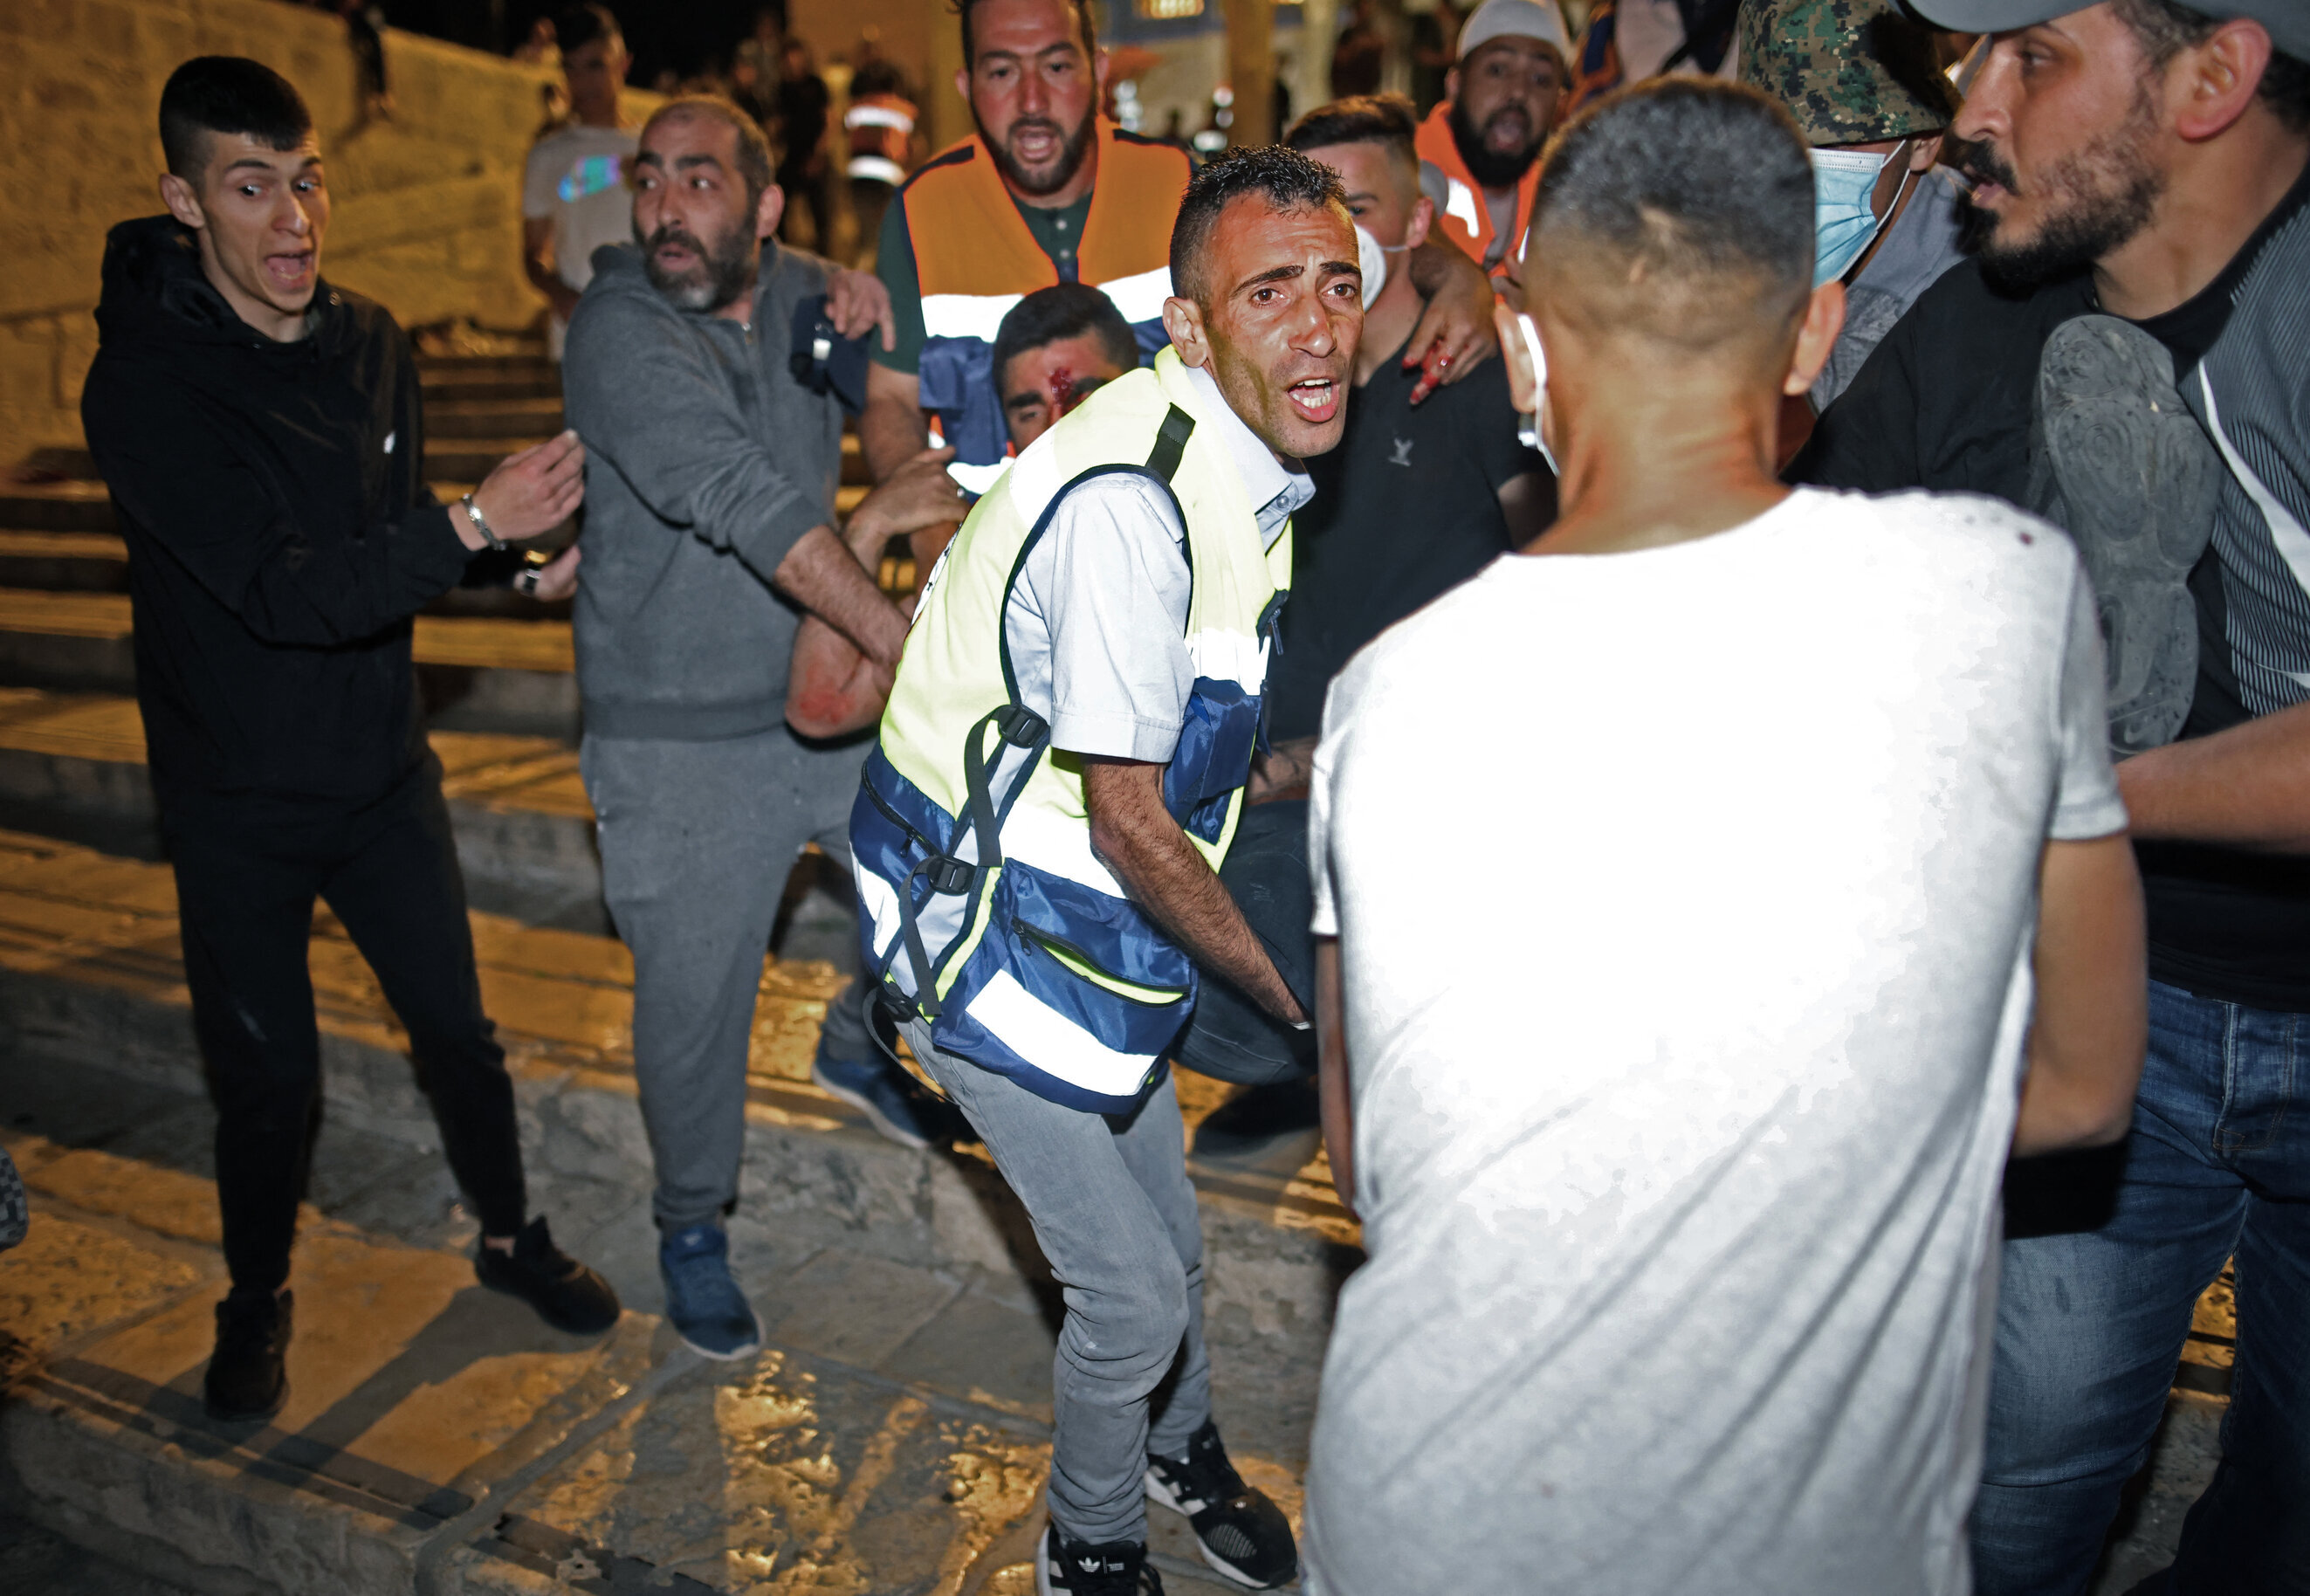 An injured man is carried away as Israeli security forces crackdown on Palestinians at al-Aqsa mosque in Jerusalem on 7 May 2021 (AFP)